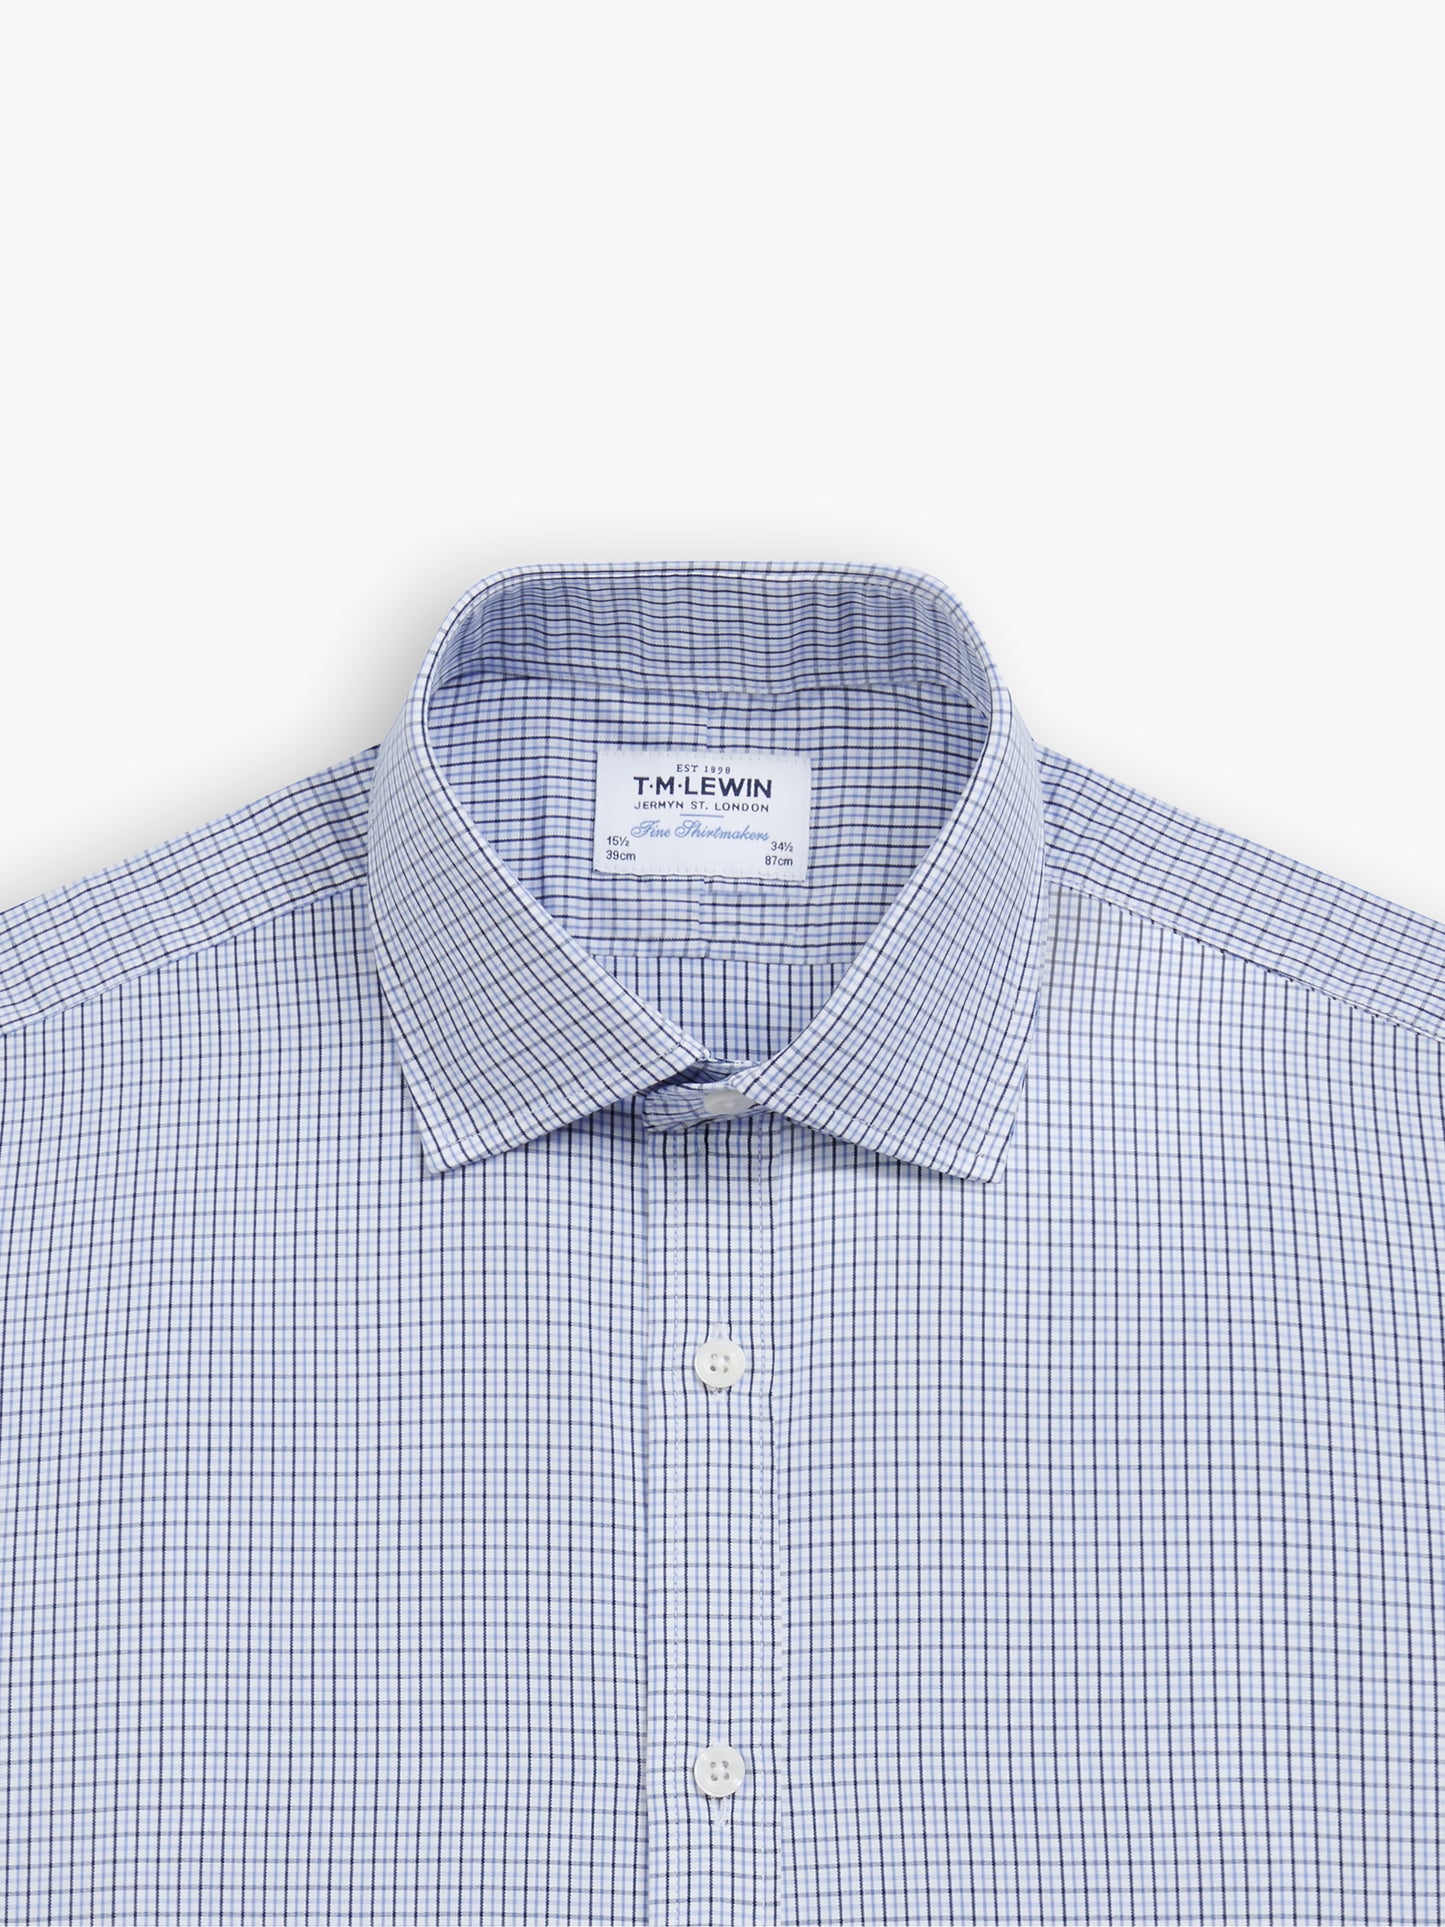 Navy & Blue Multi Grid Check Plain Weave Fitted Single Cuff Classic Collar Shirt